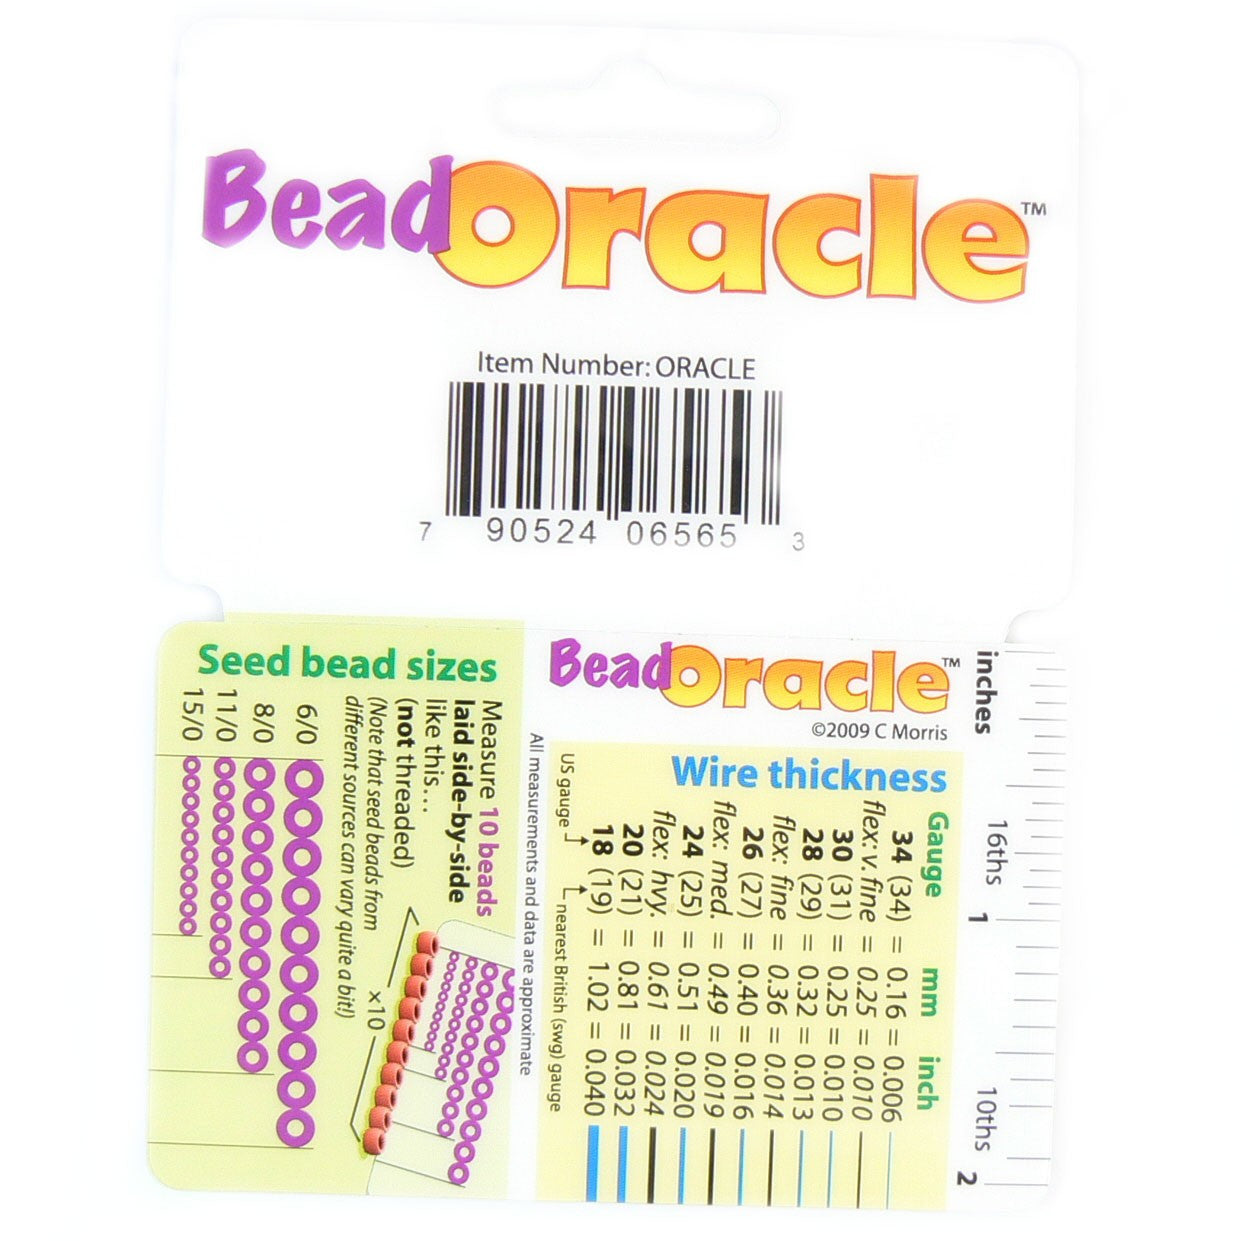 1 Step Crimper Tool by Bead Buddy Perfect Crimps in 1 Squeeze I WISH I Knew  About This Tool Years Ago Fits Crimps Beads & Tubes 